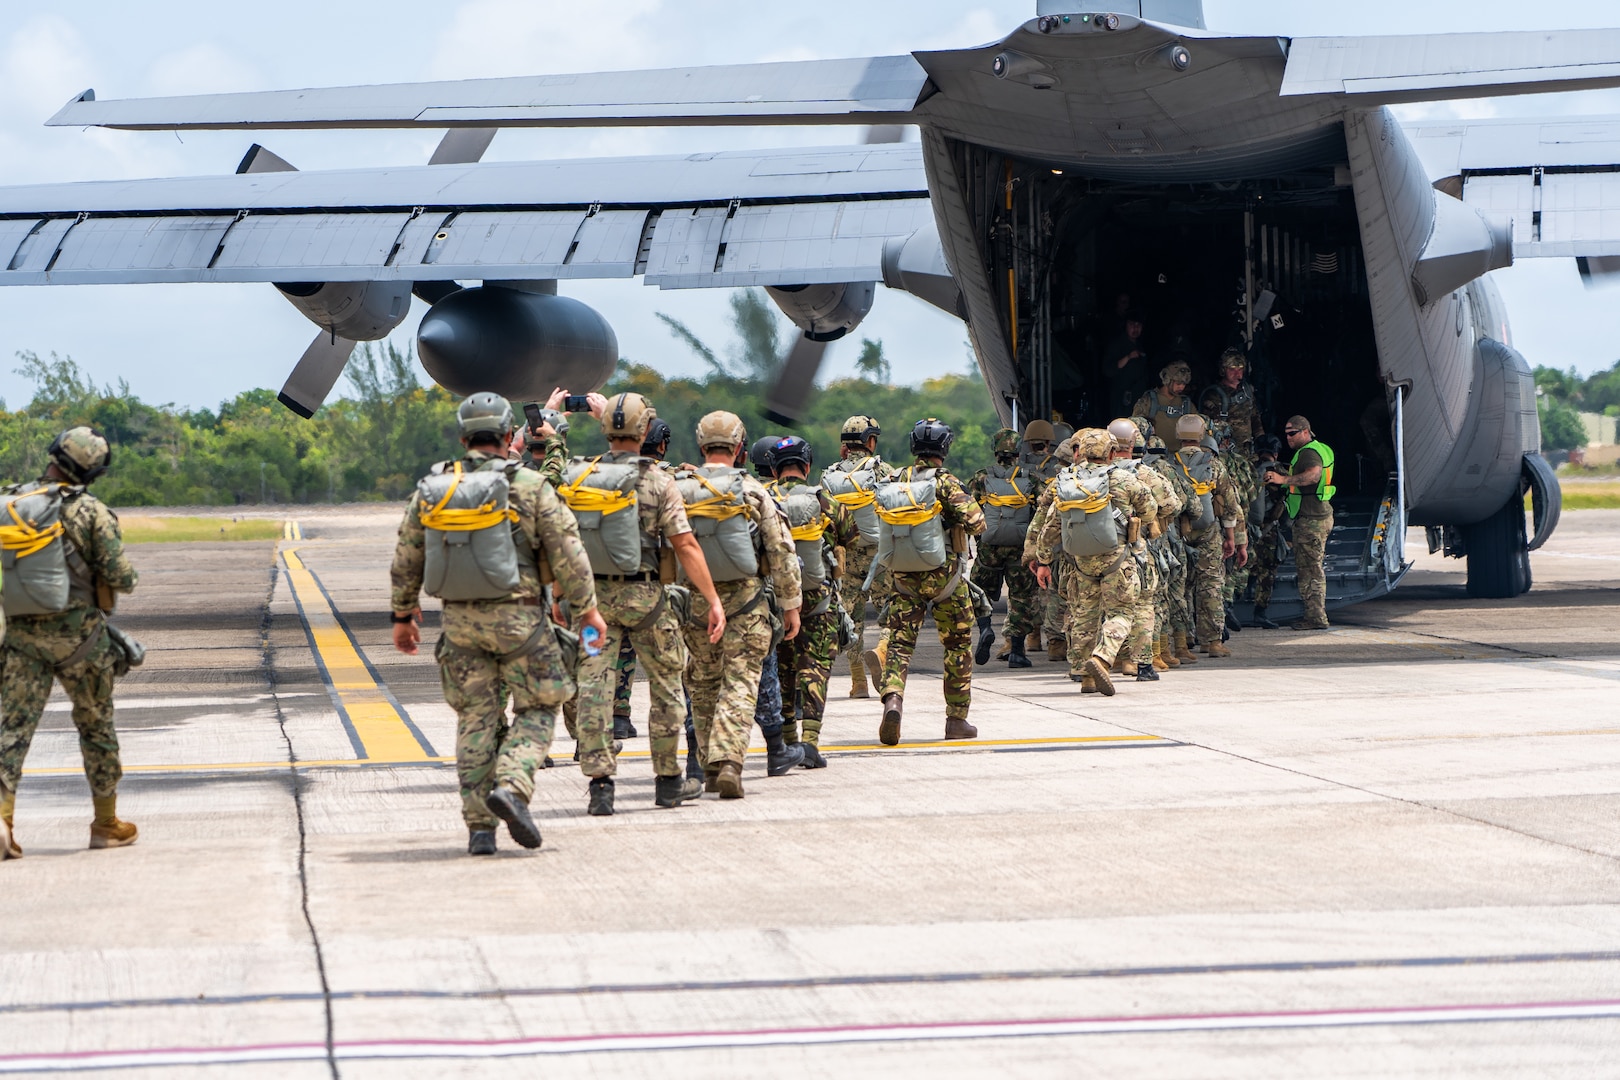 A group of soldiers boards a military aircraft.